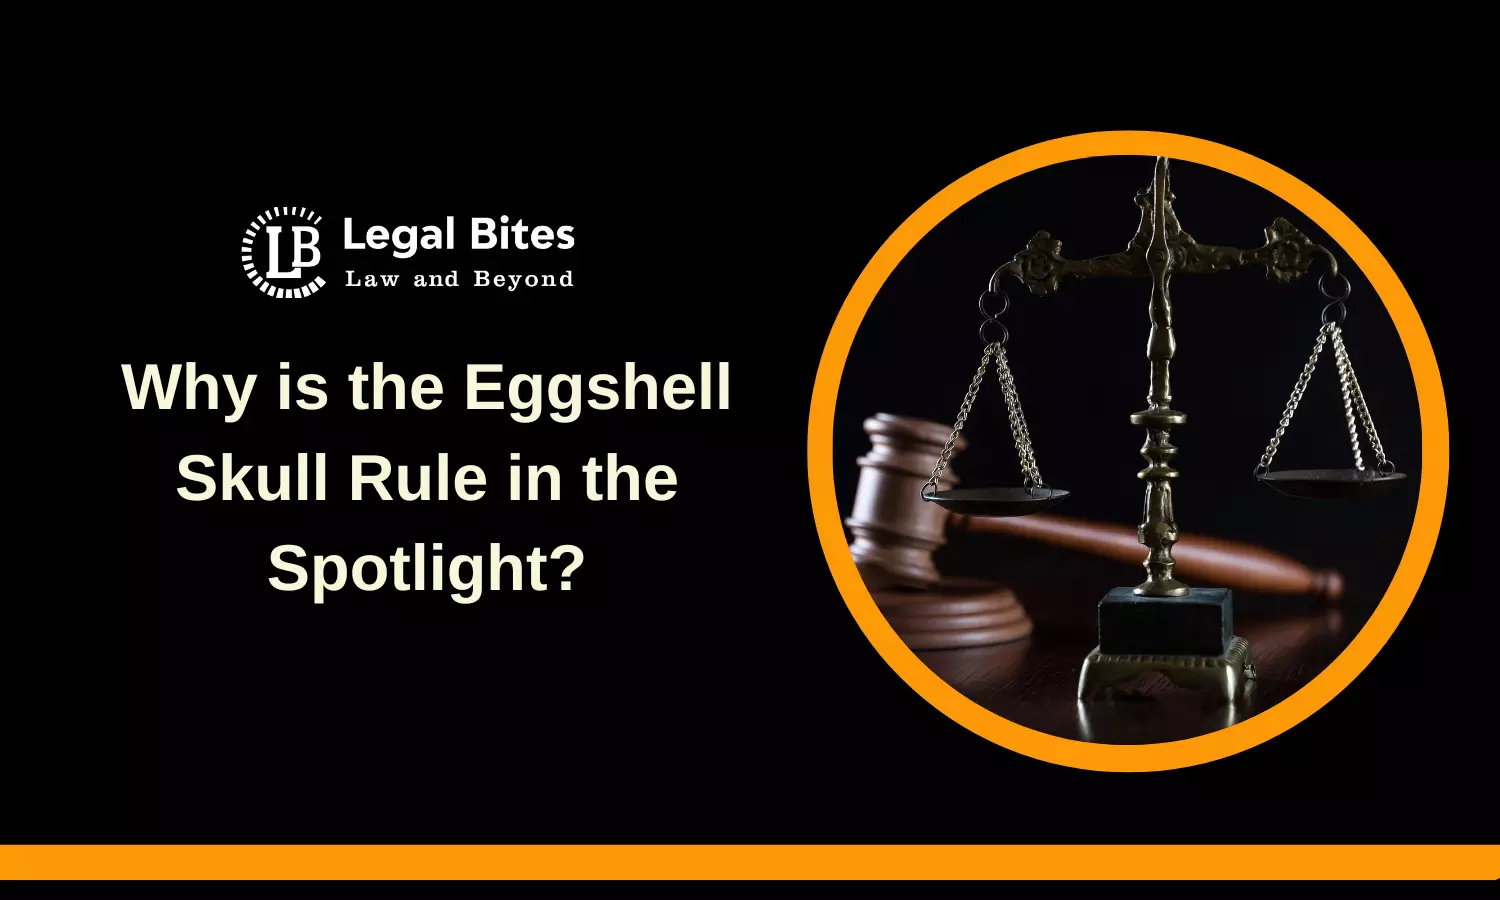 Why is the Eggshell Skull Rule in the Spotlight?